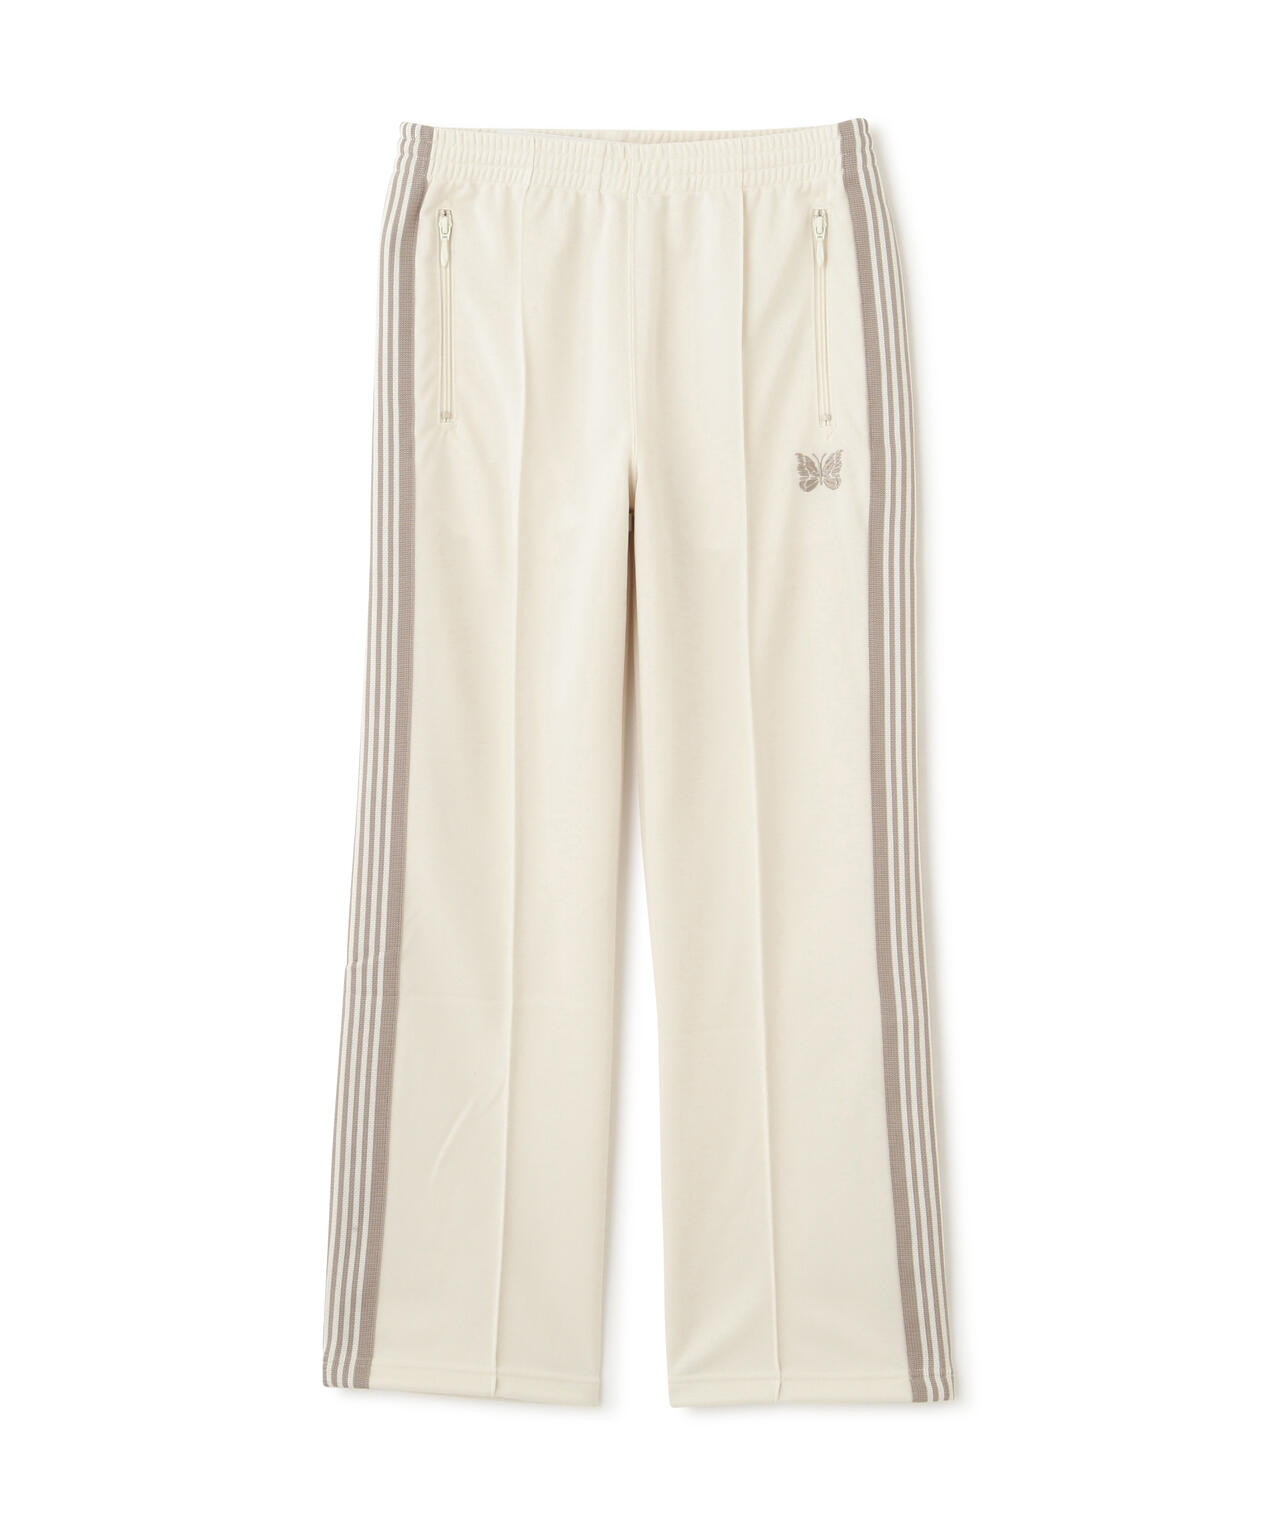 NEEDLES/ニードルズ/LHP Exclusive Track Pant - Poly Smooth 1/別注 